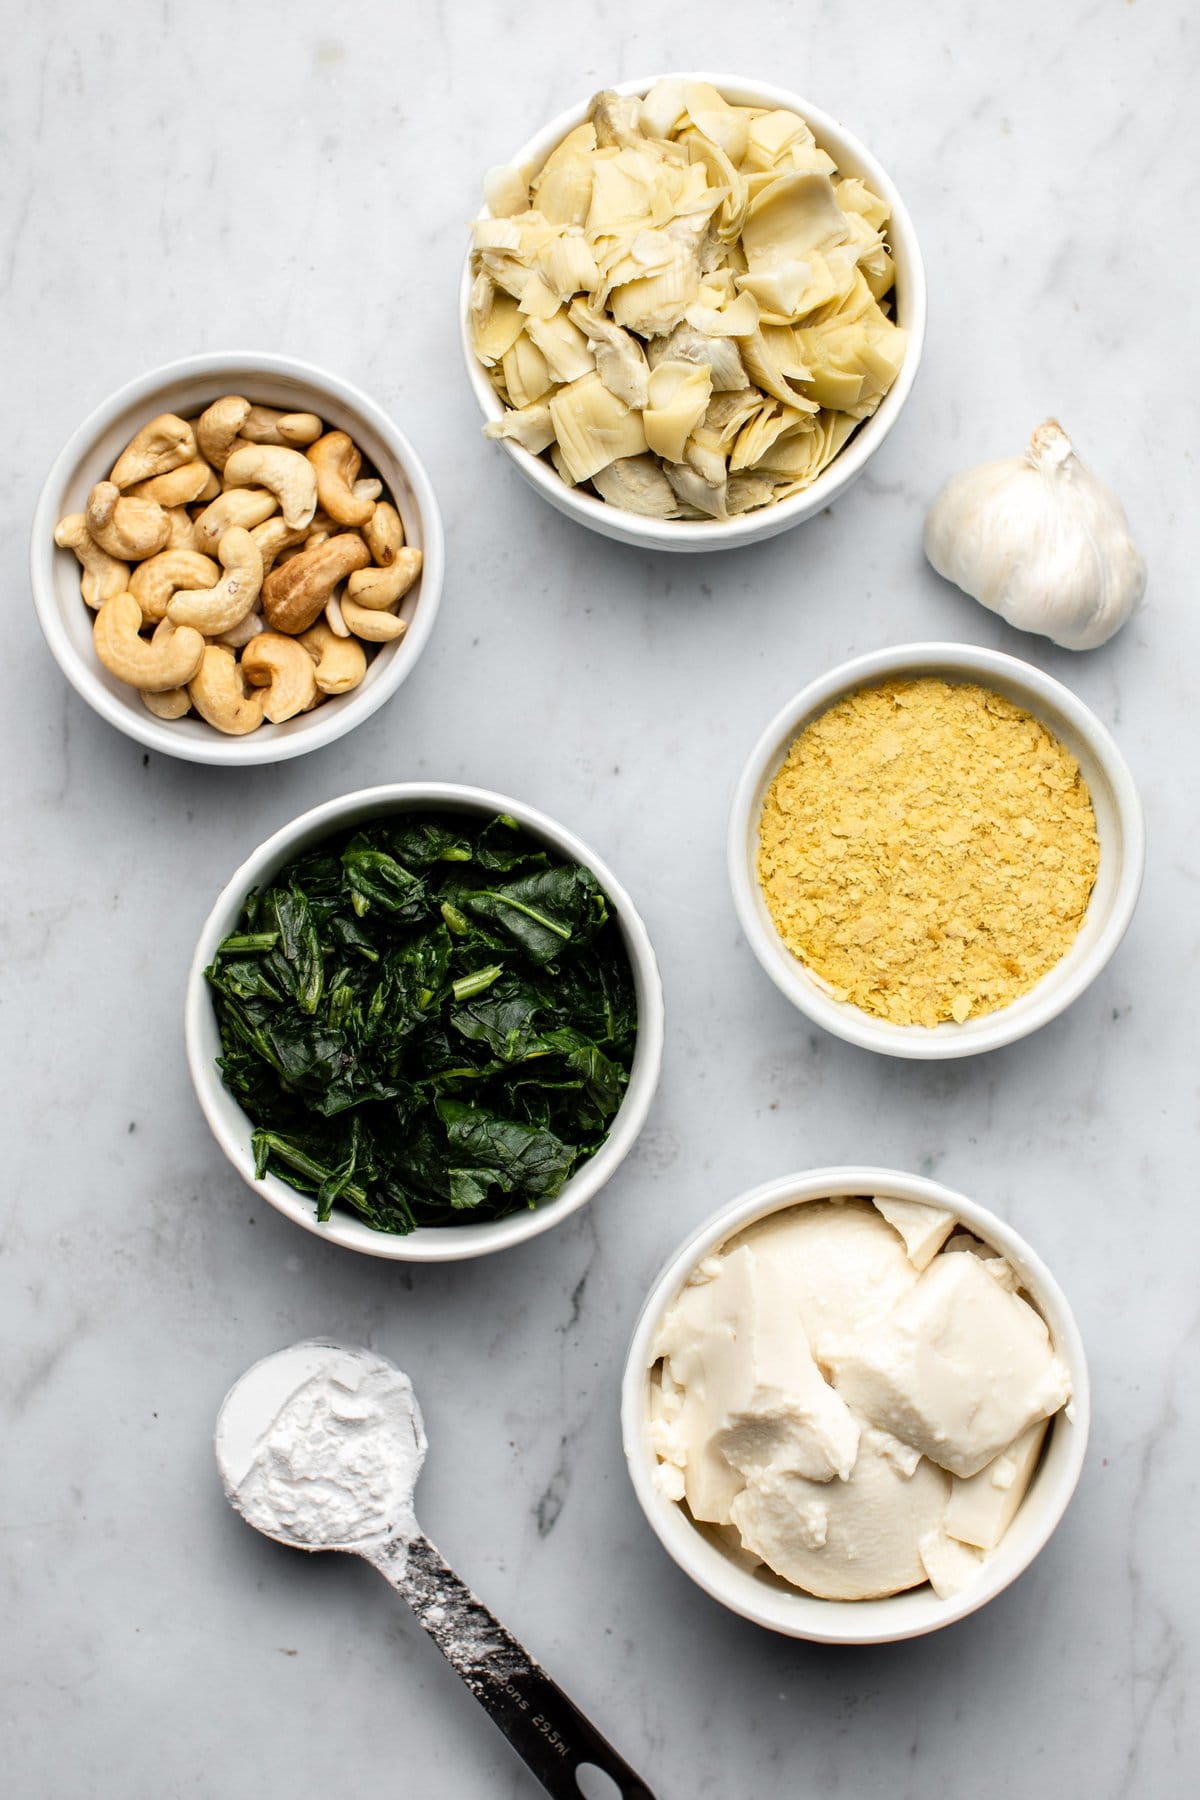 ingredients for spinach and artichoke dip in small white dishes on gray marble background